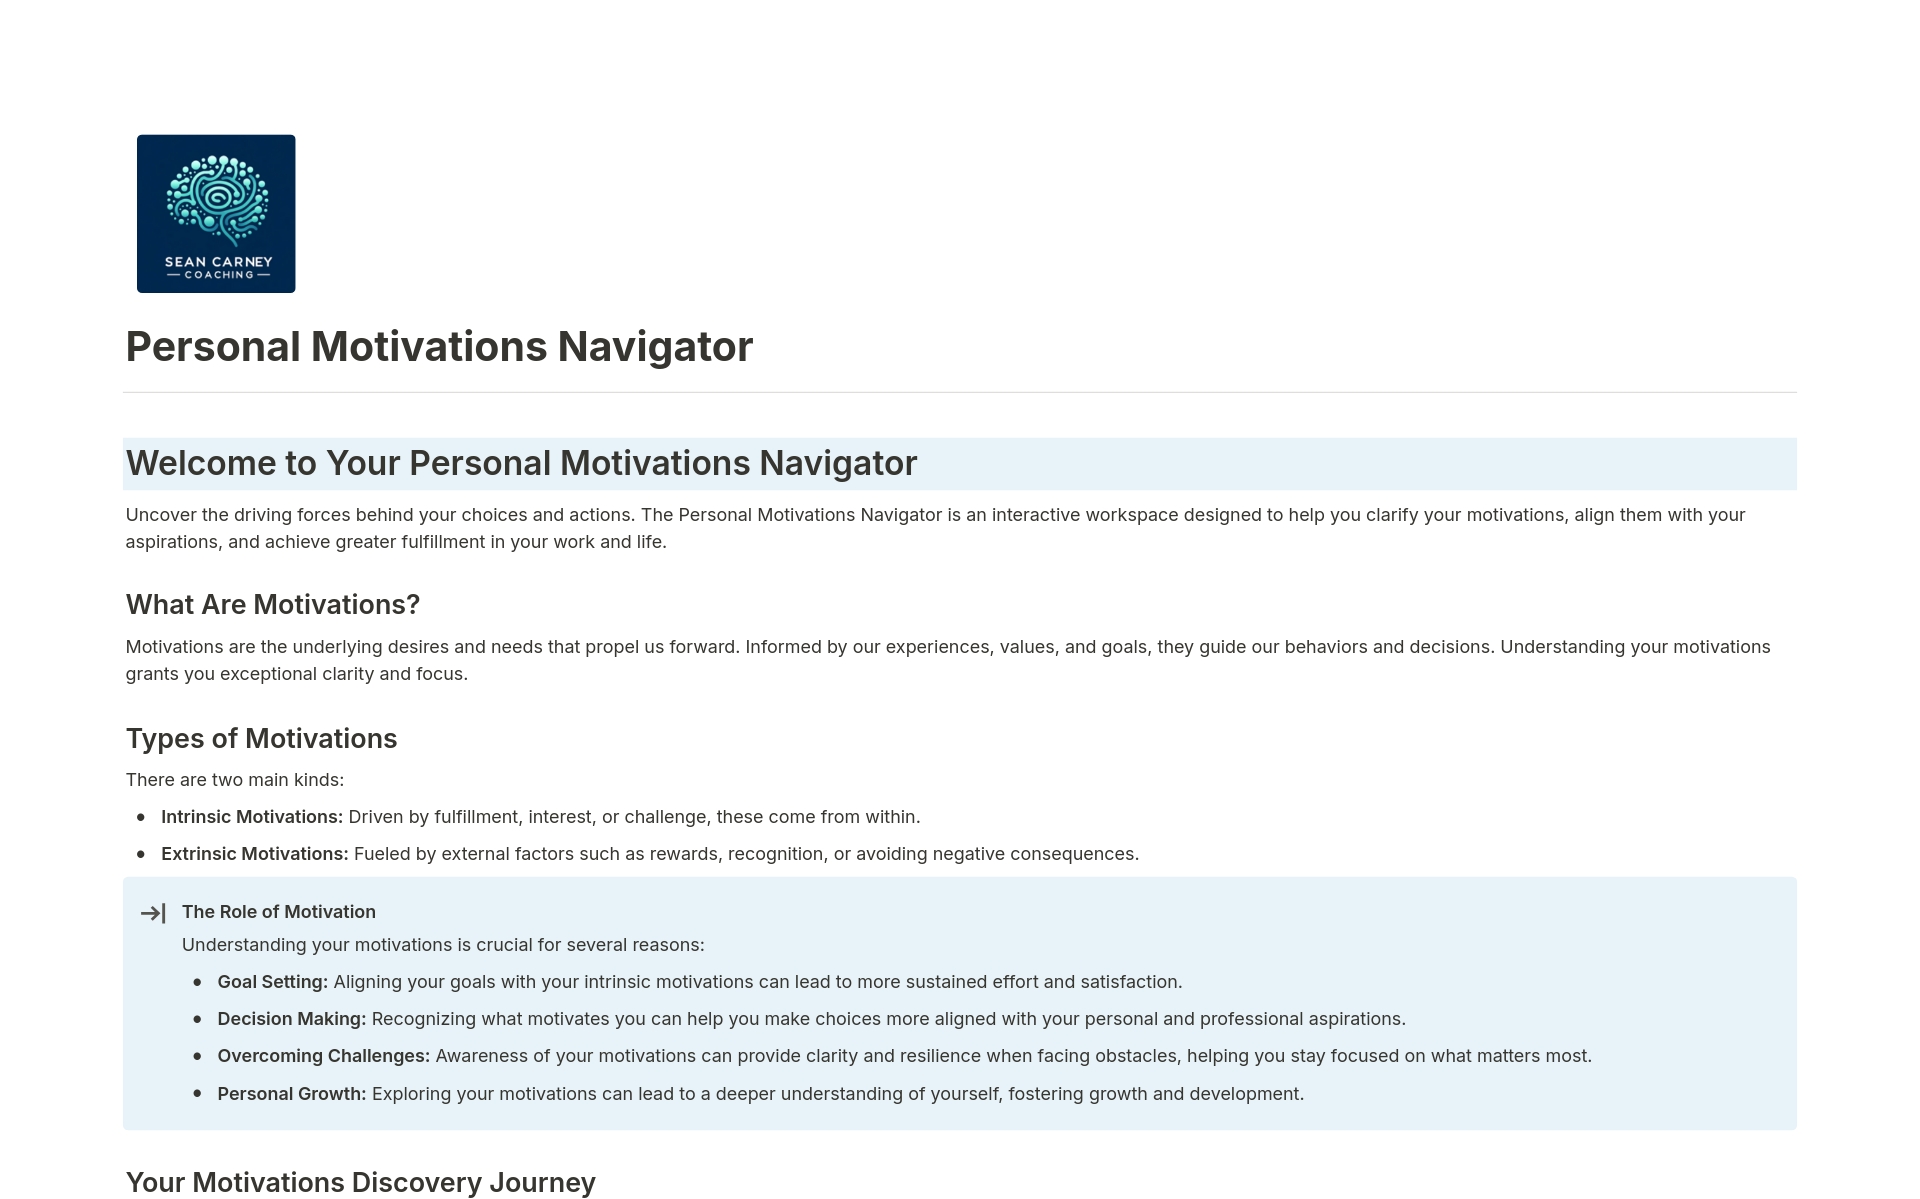 The Personal Motivations Navigator: A concise Notion template for discovering and aligning life with your core motivators through reflection and actionable steps.